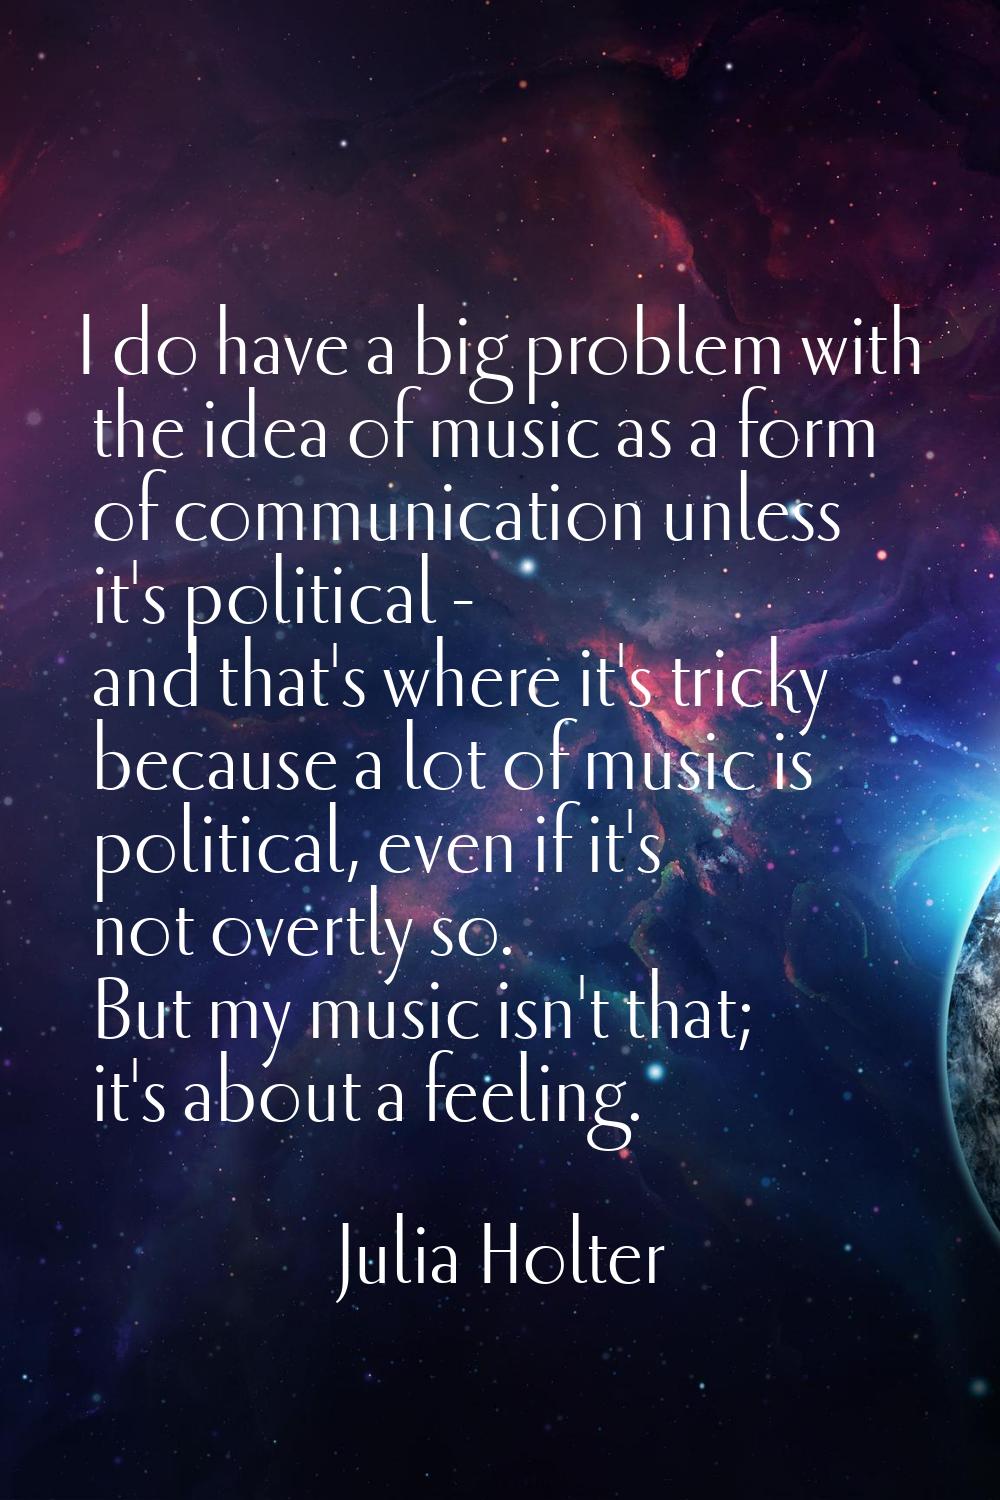 I do have a big problem with the idea of music as a form of communication unless it's political - a